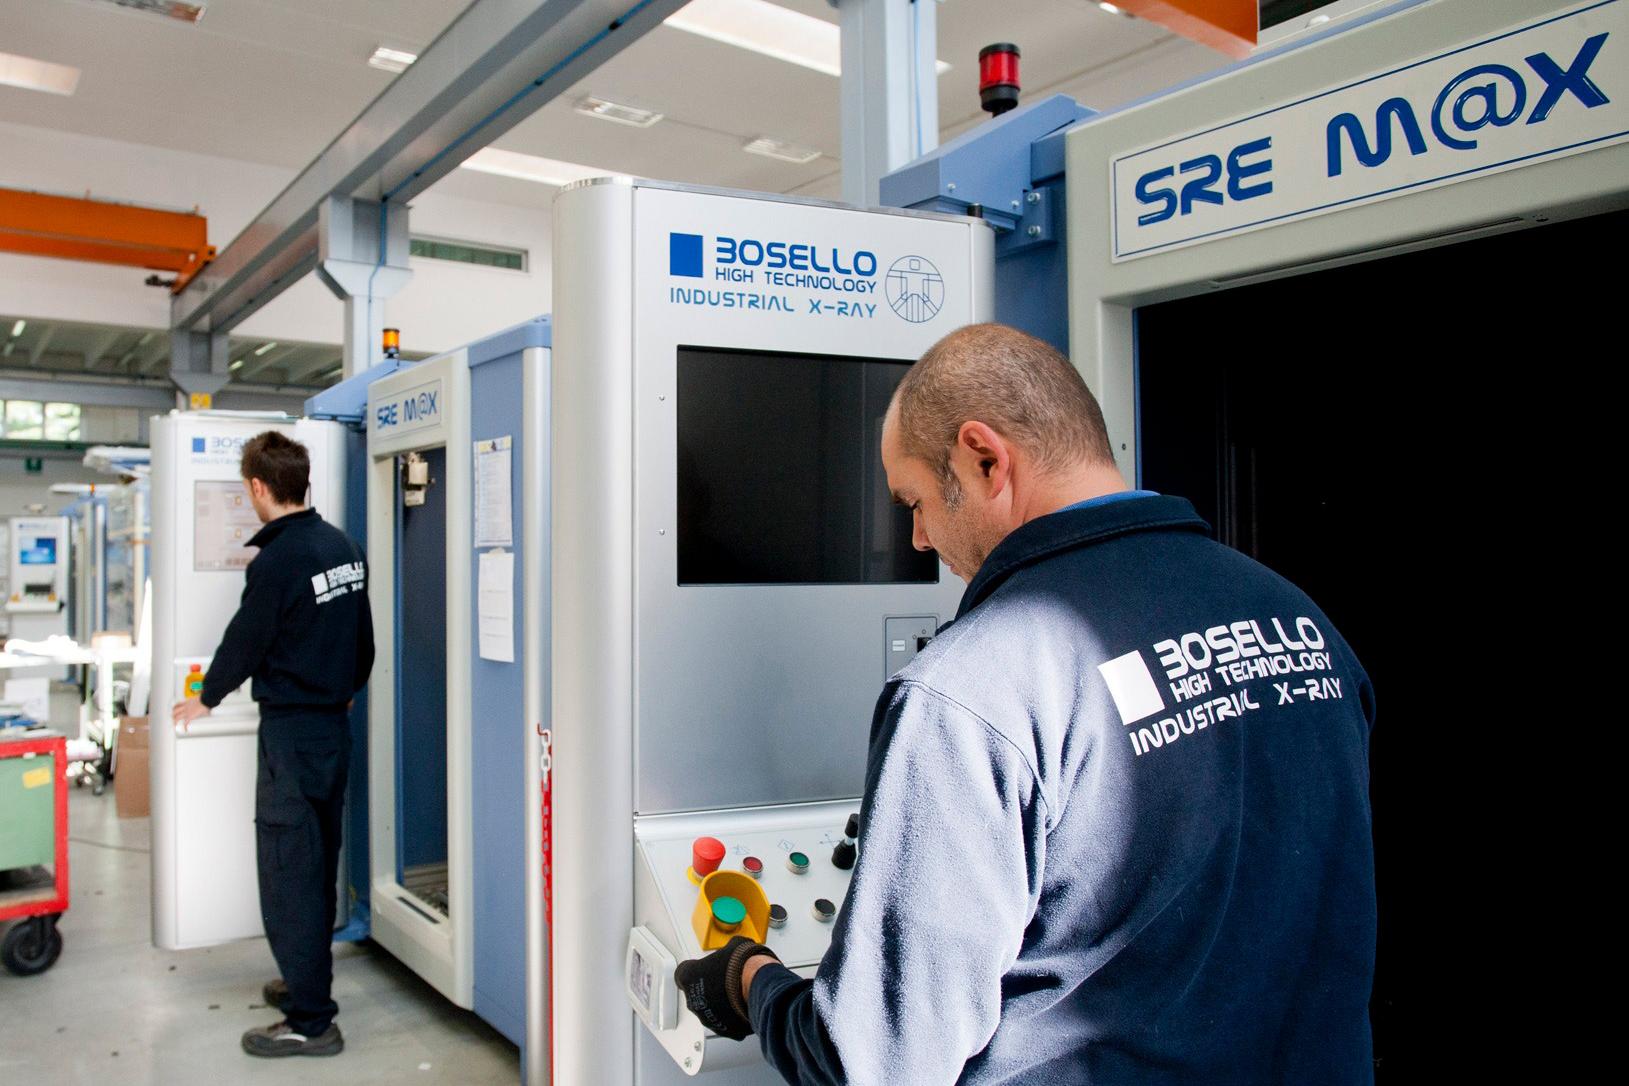 BOSELLO HIGH TECHNOLOGY offers industrial X-ray solutions